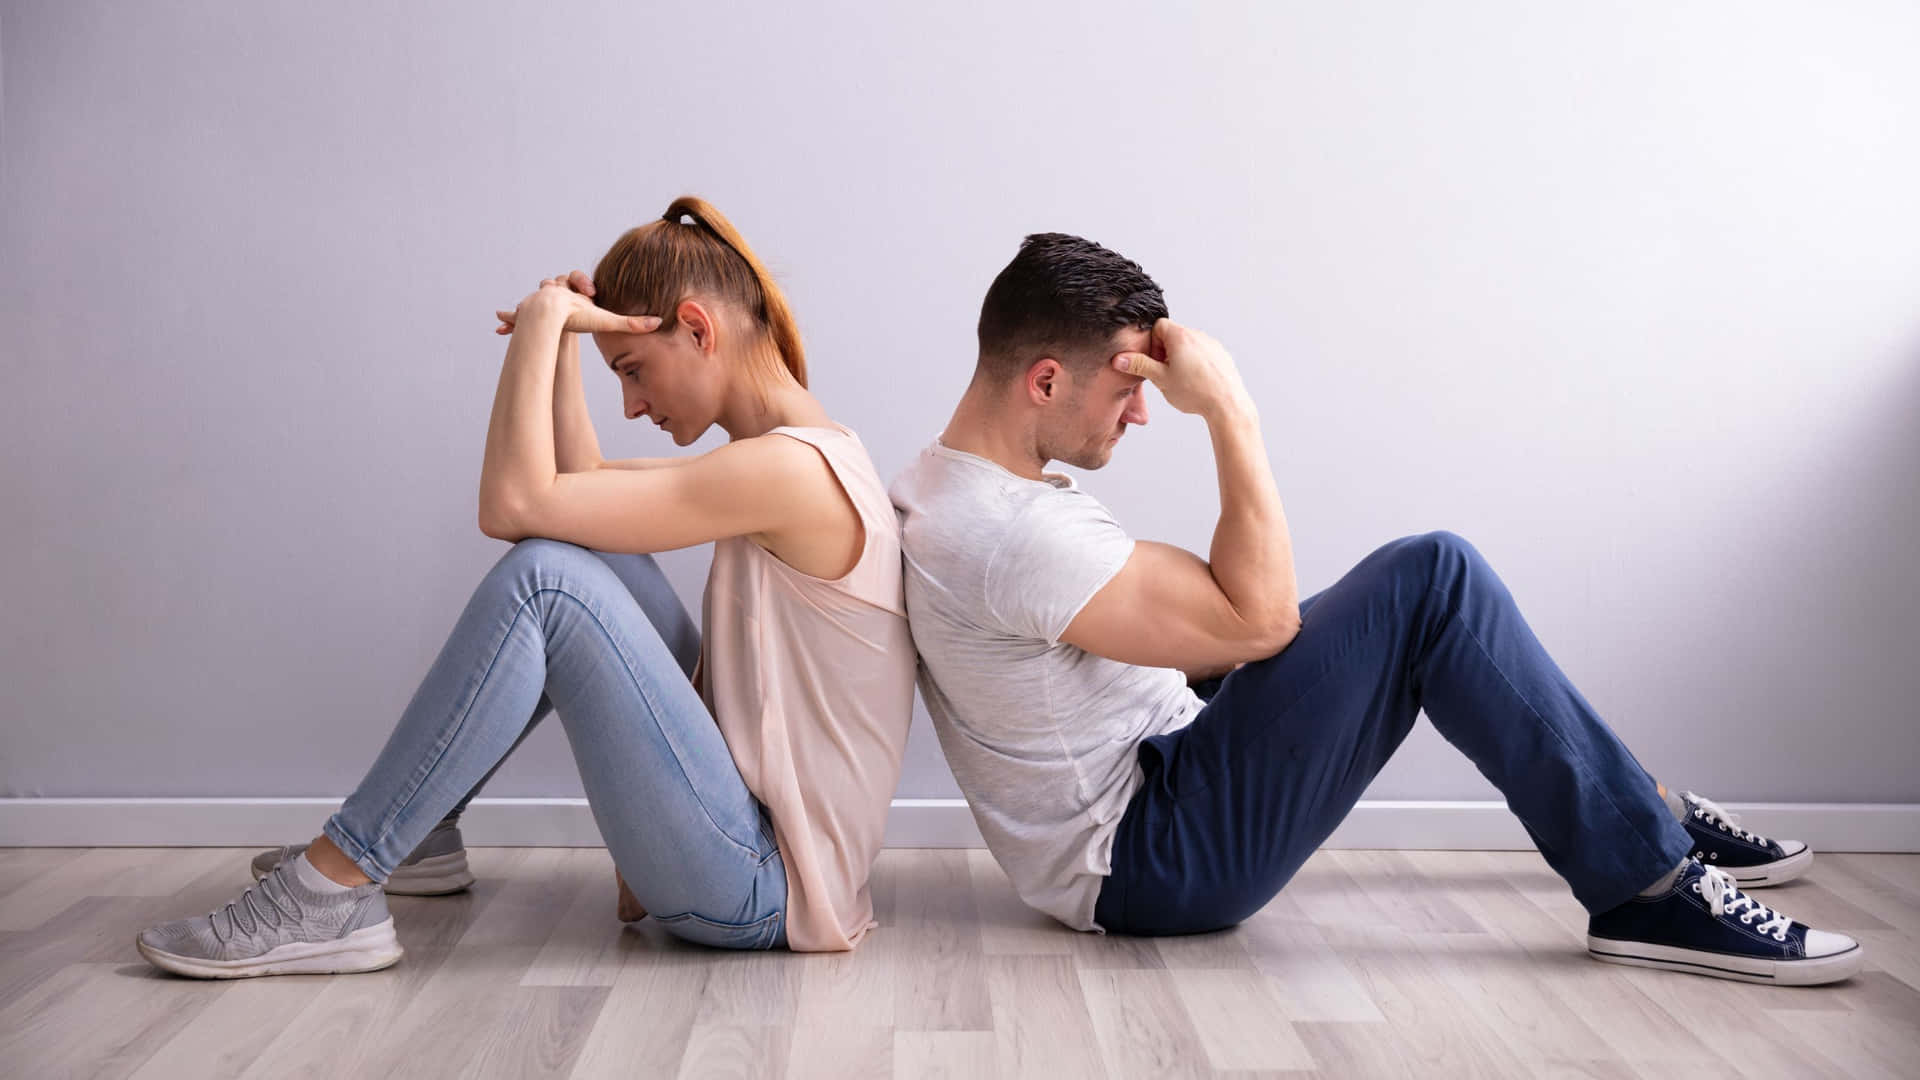 Sad Couple Leaning On Each Other Wallpaper